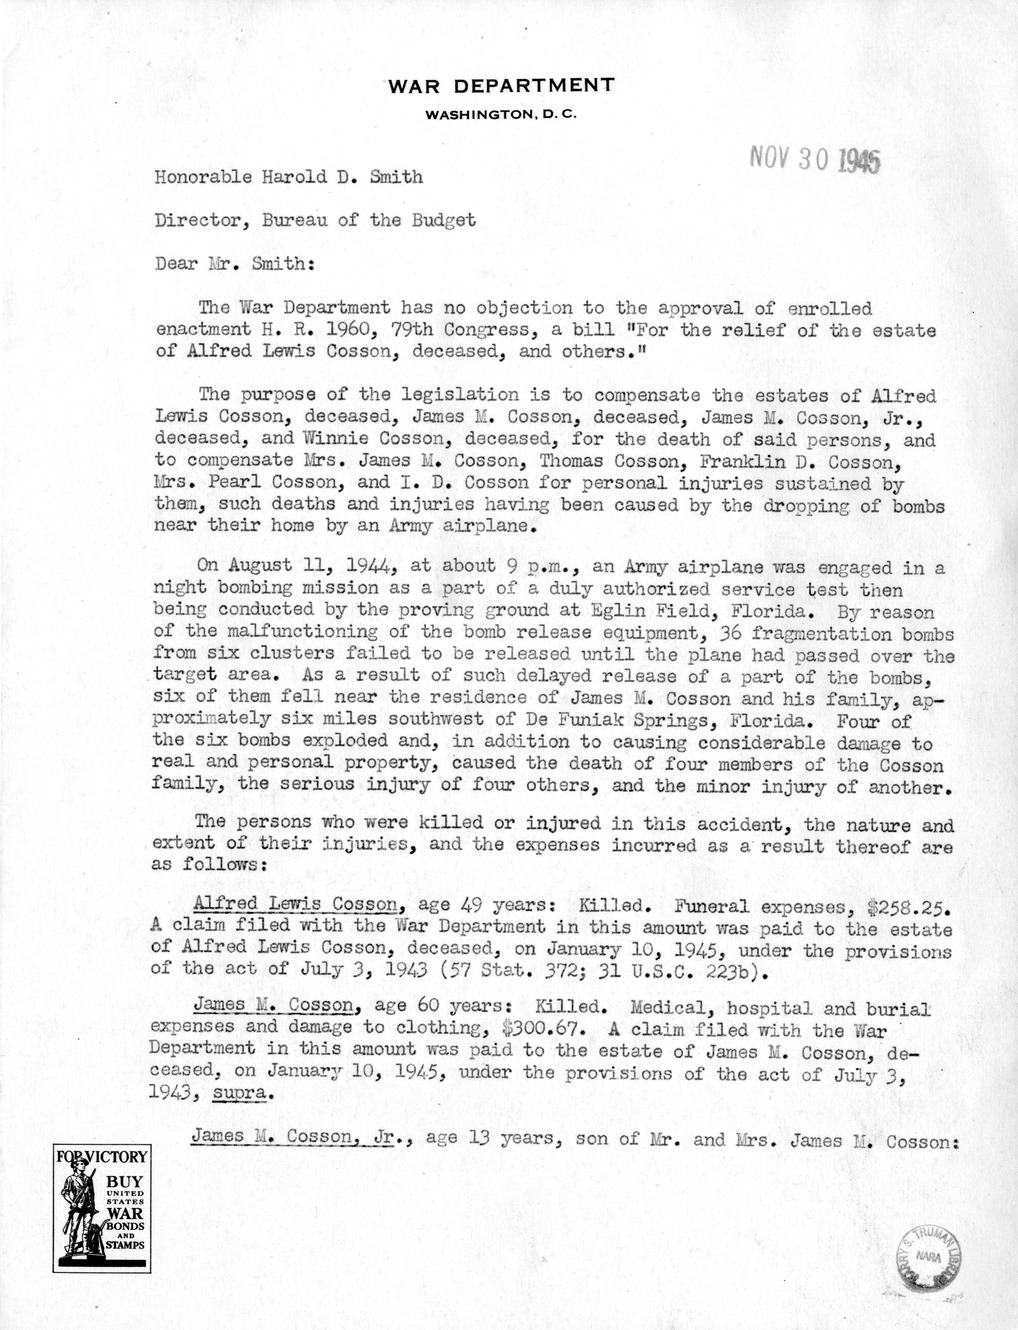 Memorandum from Frederick J. Bailey to M. C. Latta, H.R. 1960, For the Relief of the Estate of Alfred Lewis Cosson, Deceased, and Others, with Attachments